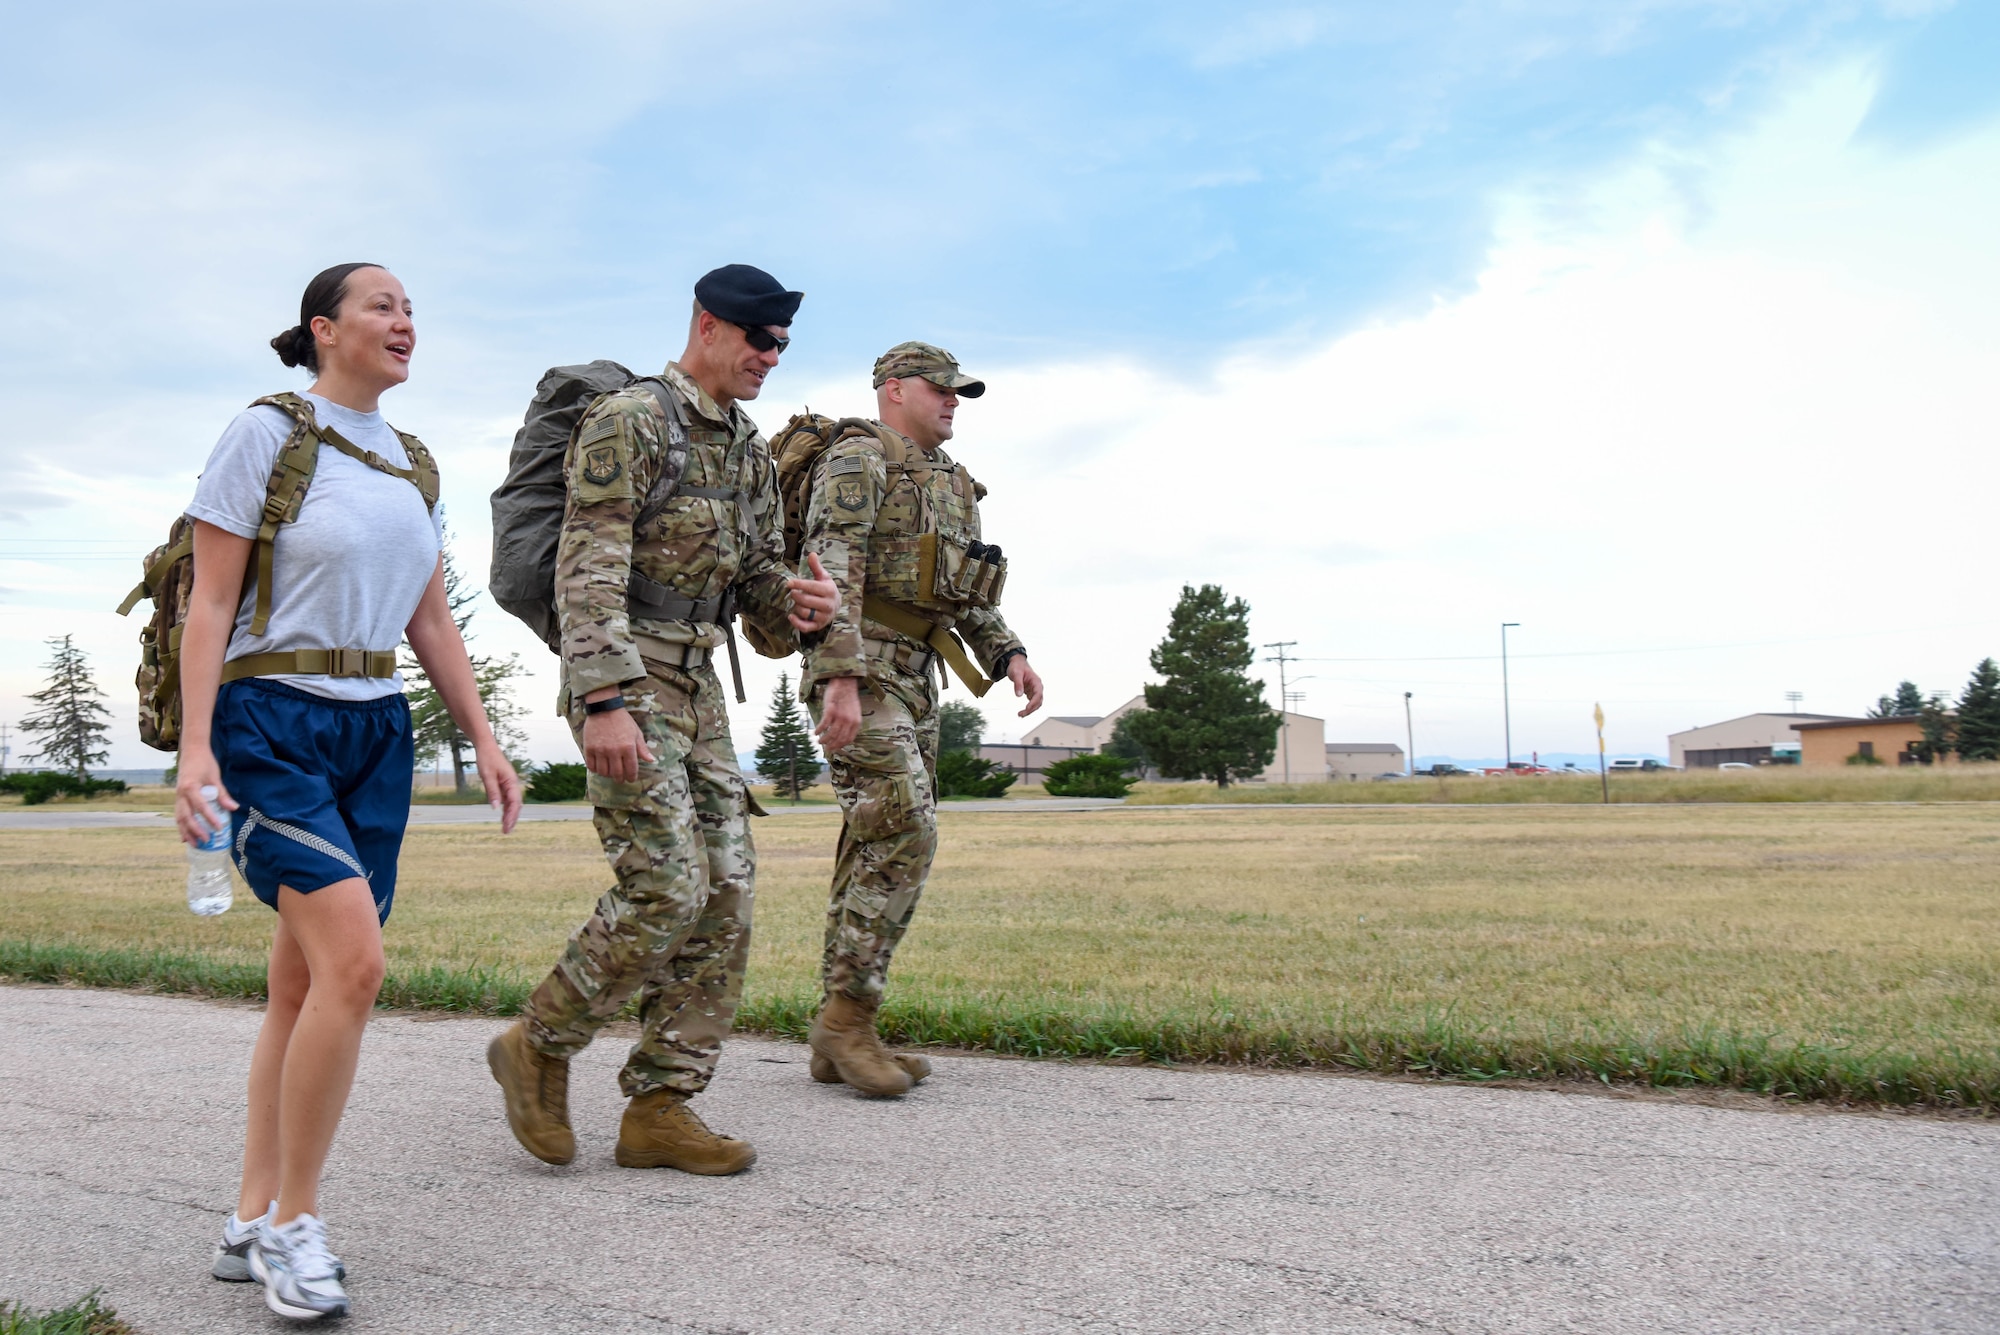 Service members participate in a 5K ruck march held in honor of Patriot Day at Ellsworth Air Force Base, S.D., Sept. 11, 2018. Participants gathered at the Heritage Lake pavilion on base prior to the ruck march to observe a moment of silence in remembrance of those who died as result of the 9/11 terrorist attack. (U.S. Air Force photo by Airman Christina Bennett)